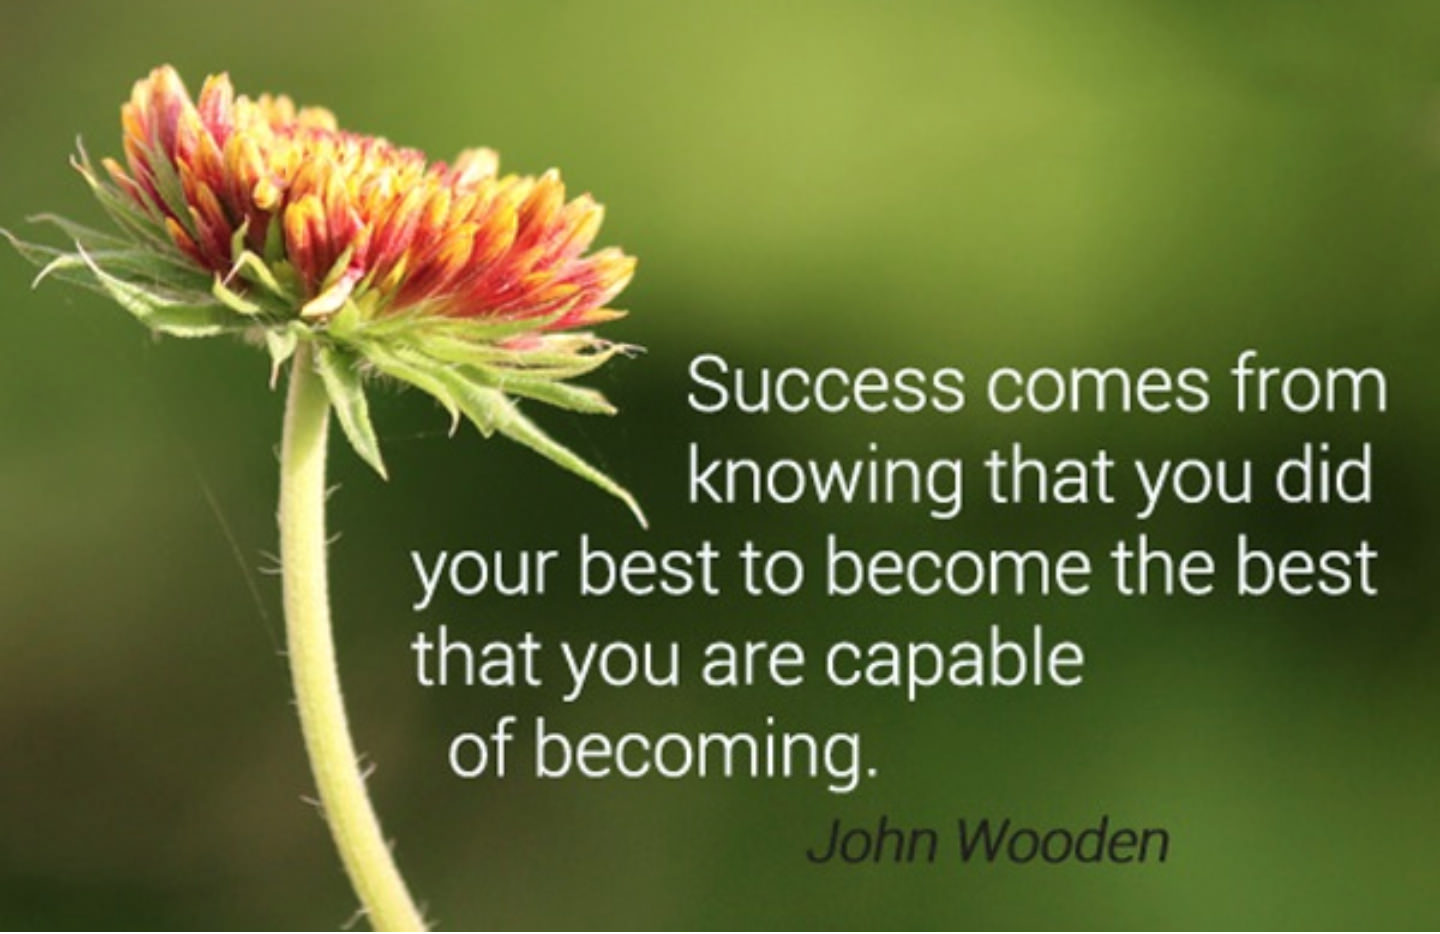 Success comes from knowing ~ Living Fit Lifestyle